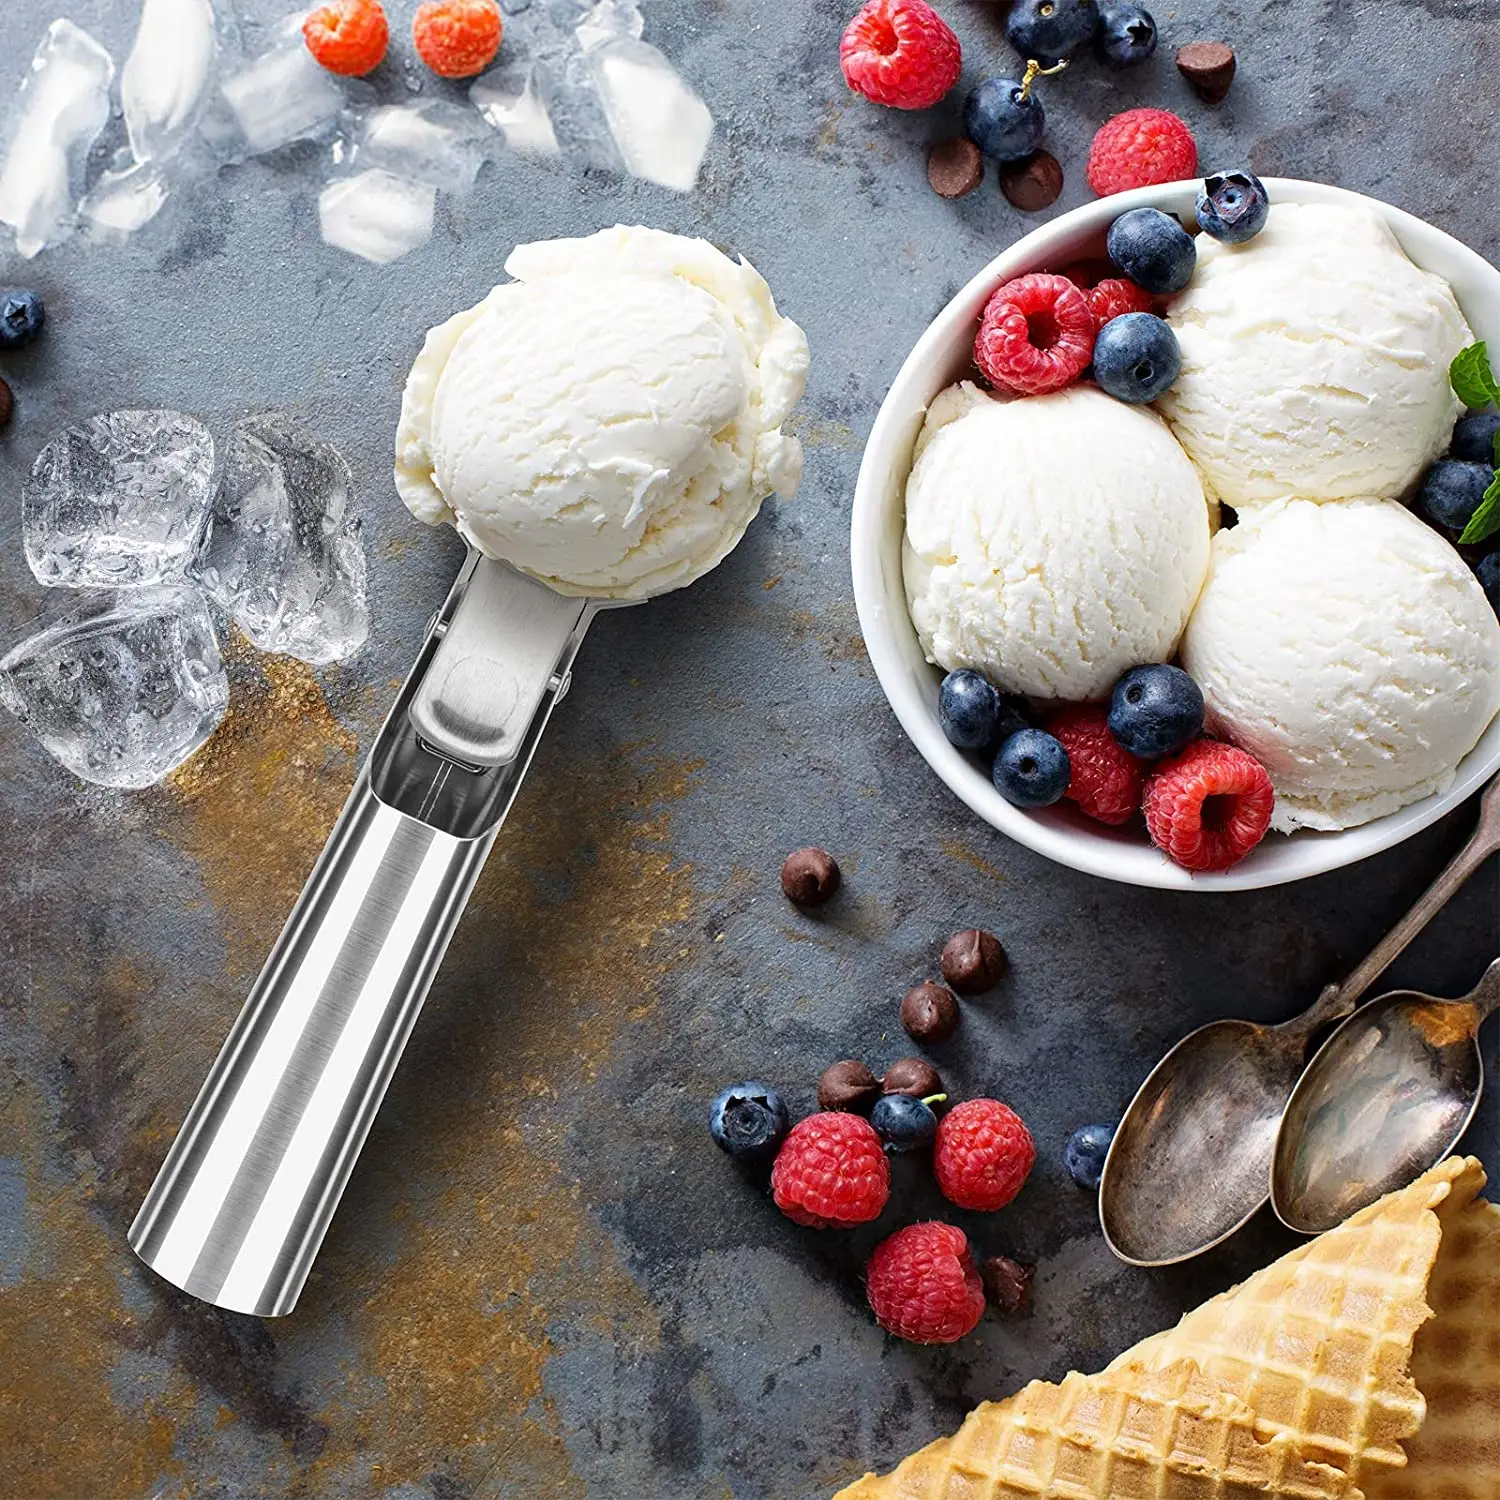 2PCS Summer Ice Cream Scoop with Trigger, Stainless Steel Ice